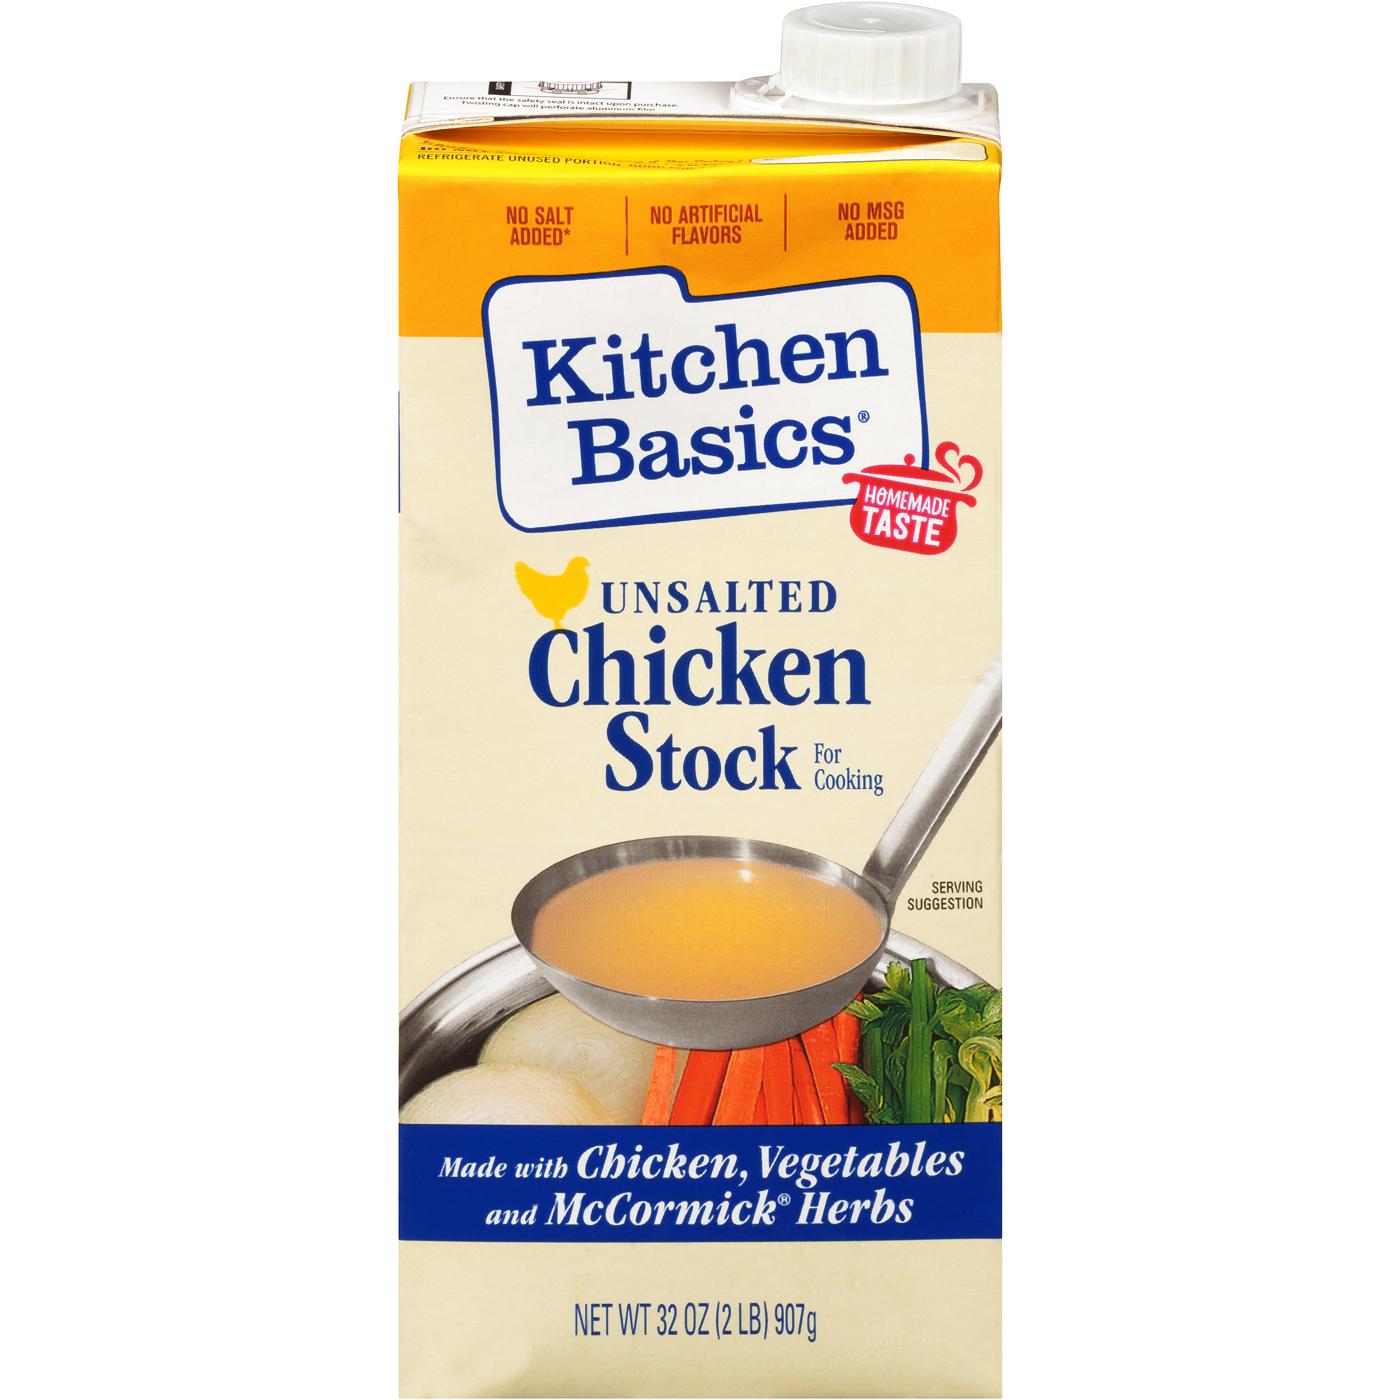 Kitchen Basics Unsalted Chicken Cooking Stock; image 1 of 11